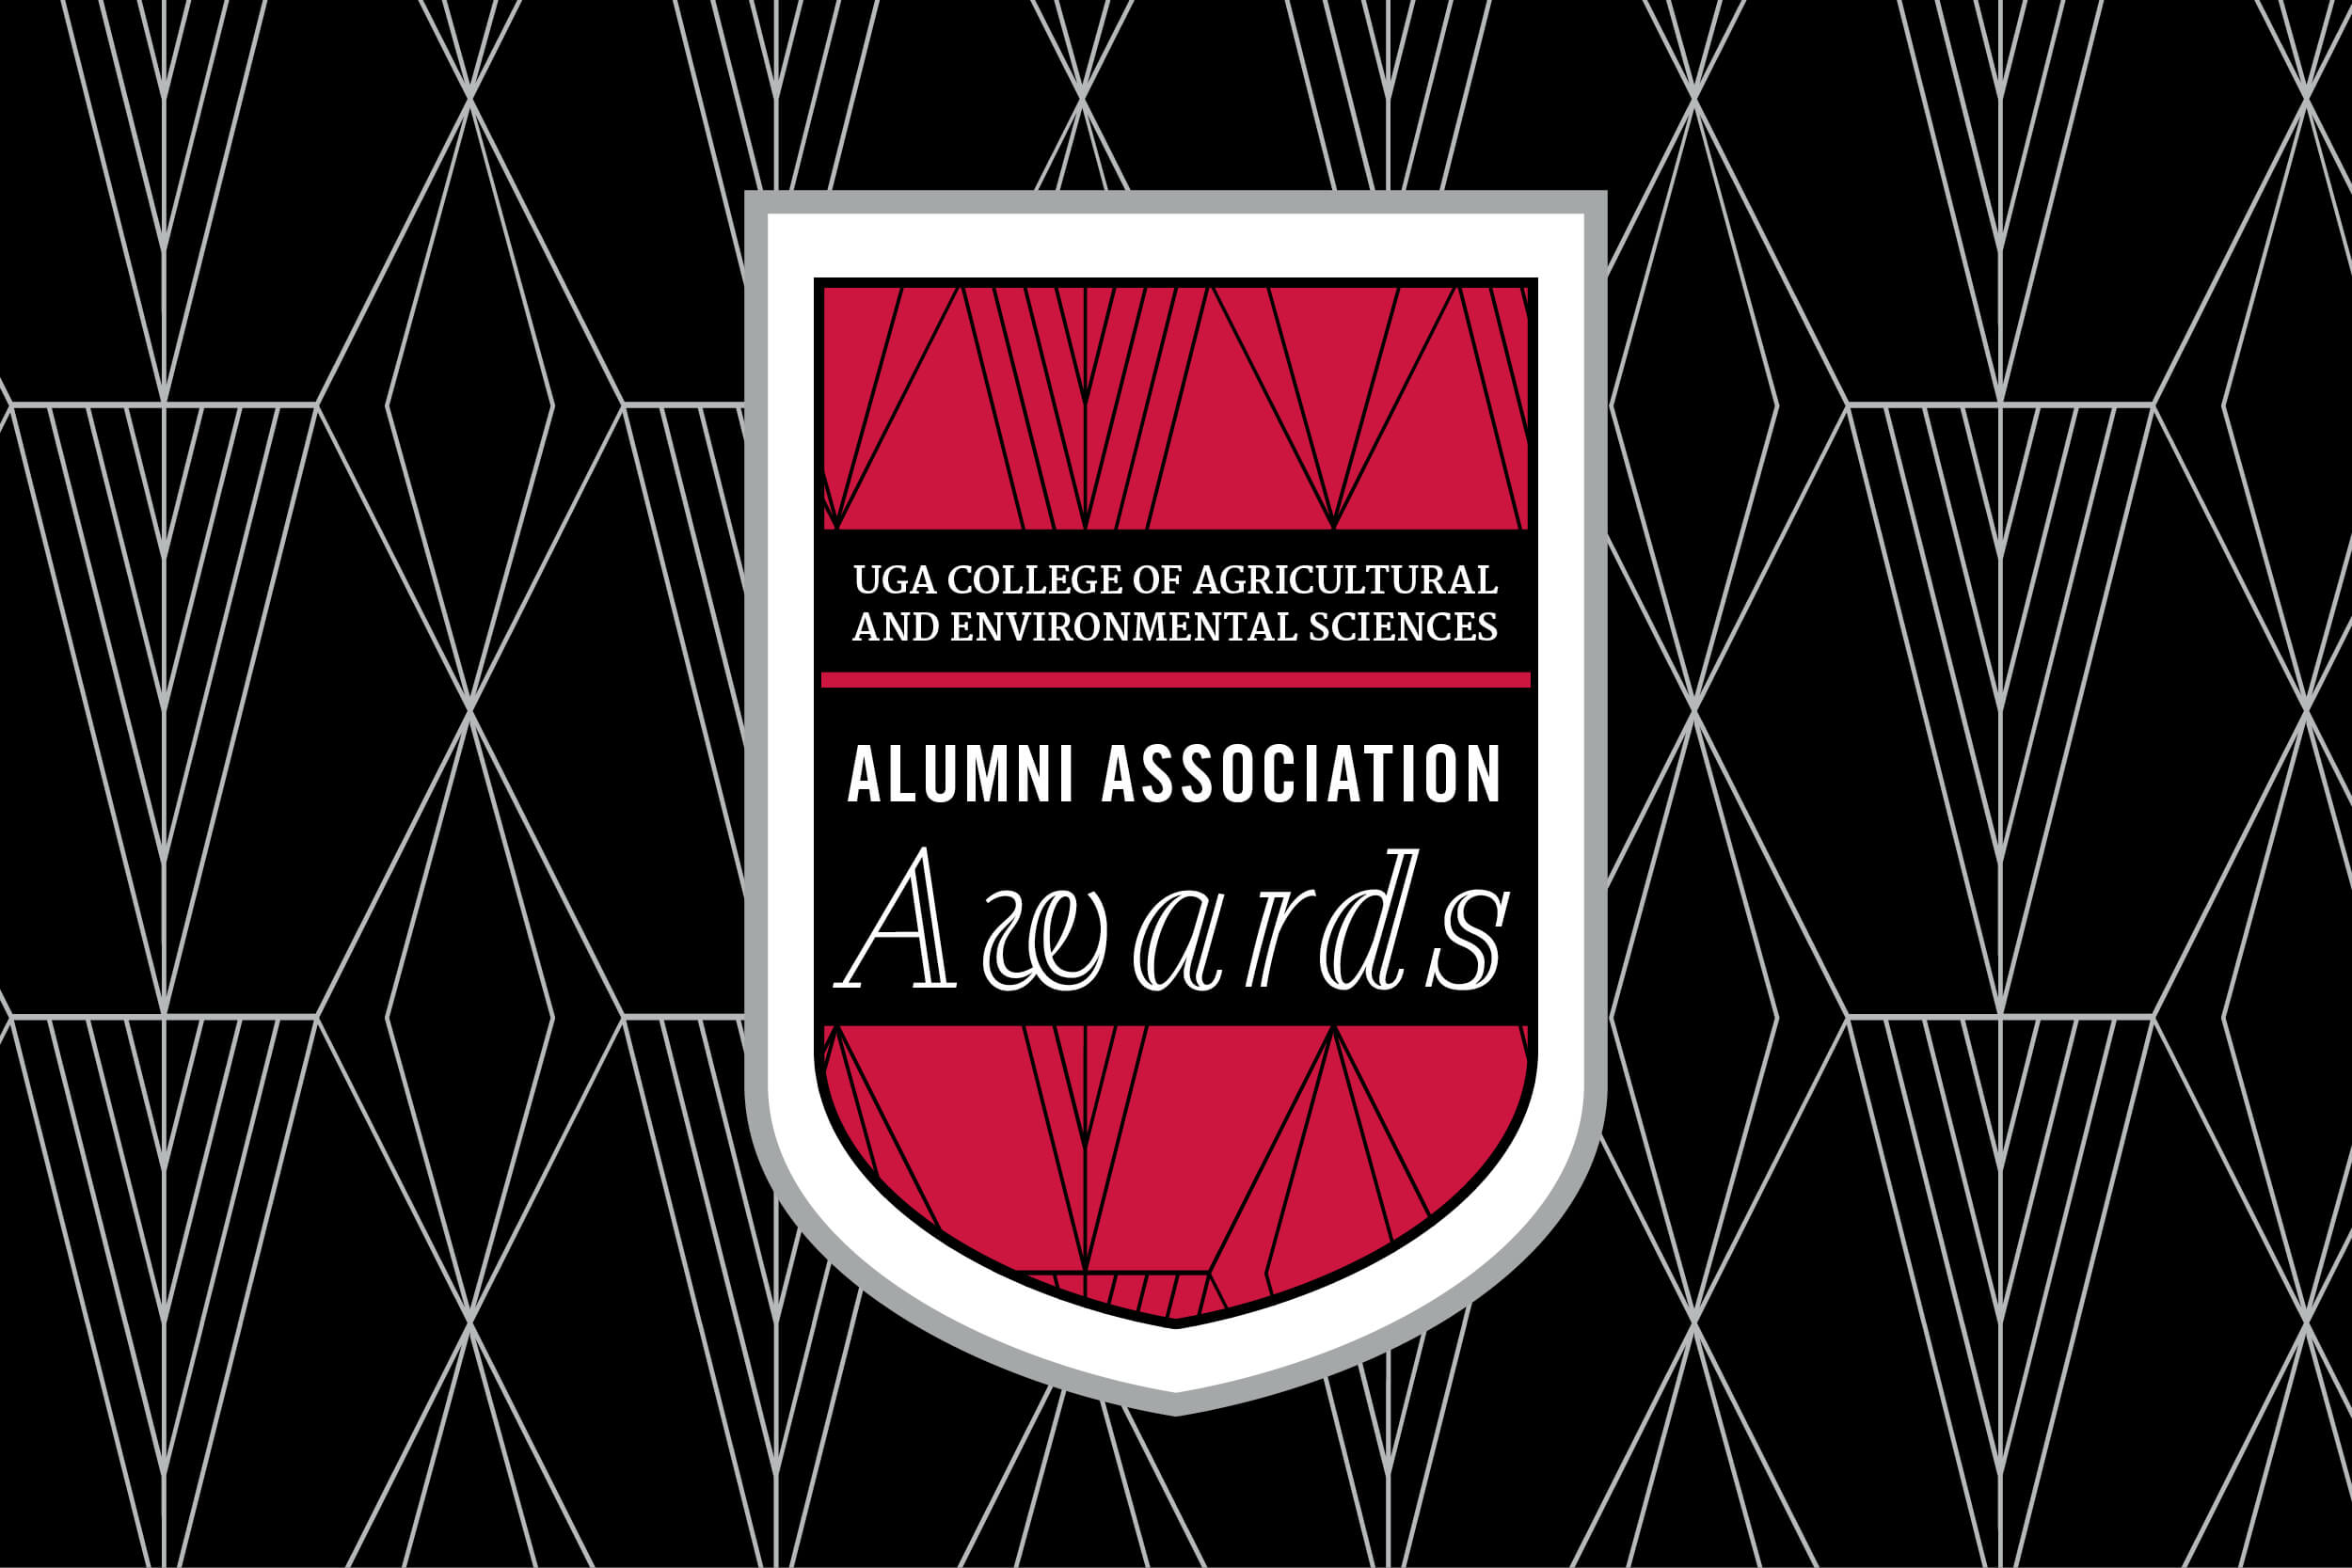 The College of Agricultural and Environmental Sciences Alumni Association recognized eight outstanding college alumni at the 66th CAES Alumni Association Awards banquet on April 9 at the University of Georgia Tate Center Grand Hall. Two Georgia agricultural leaders were honored with induction into the Georgia Agricultural Hall of Fame.